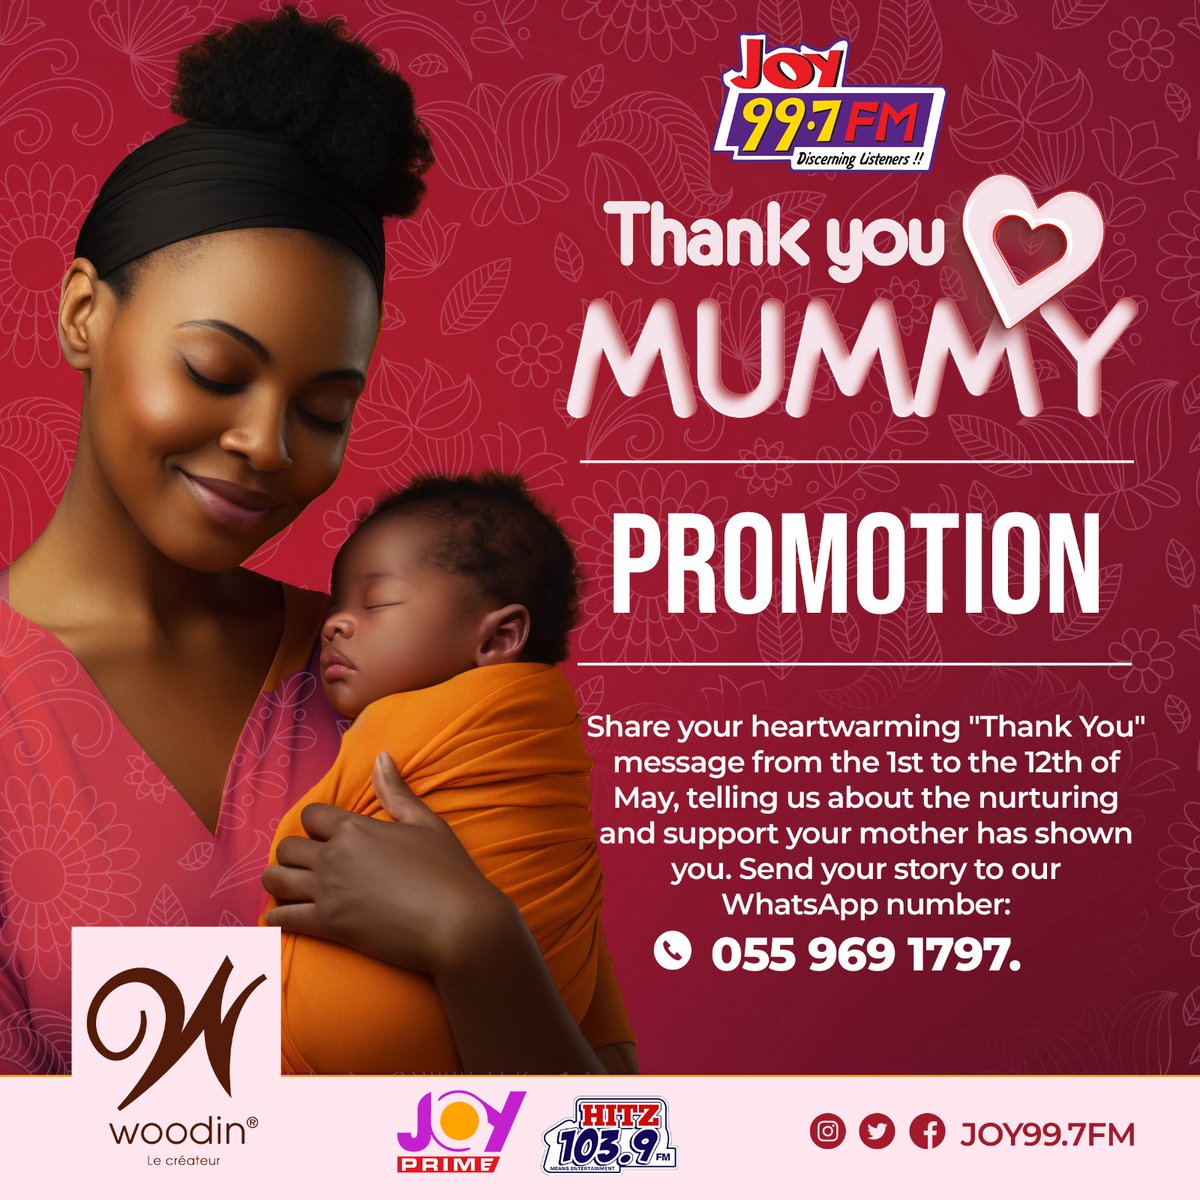 🌸 Join our 'Thank You Mummy' promotion this Mother's Day! 💌From May 1st to 12th, share your heartfelt 'Thank You' message, expressing the love and support your mom has given you over the years via our WhatsApp number 055 969 1797. #ThankYouMummy